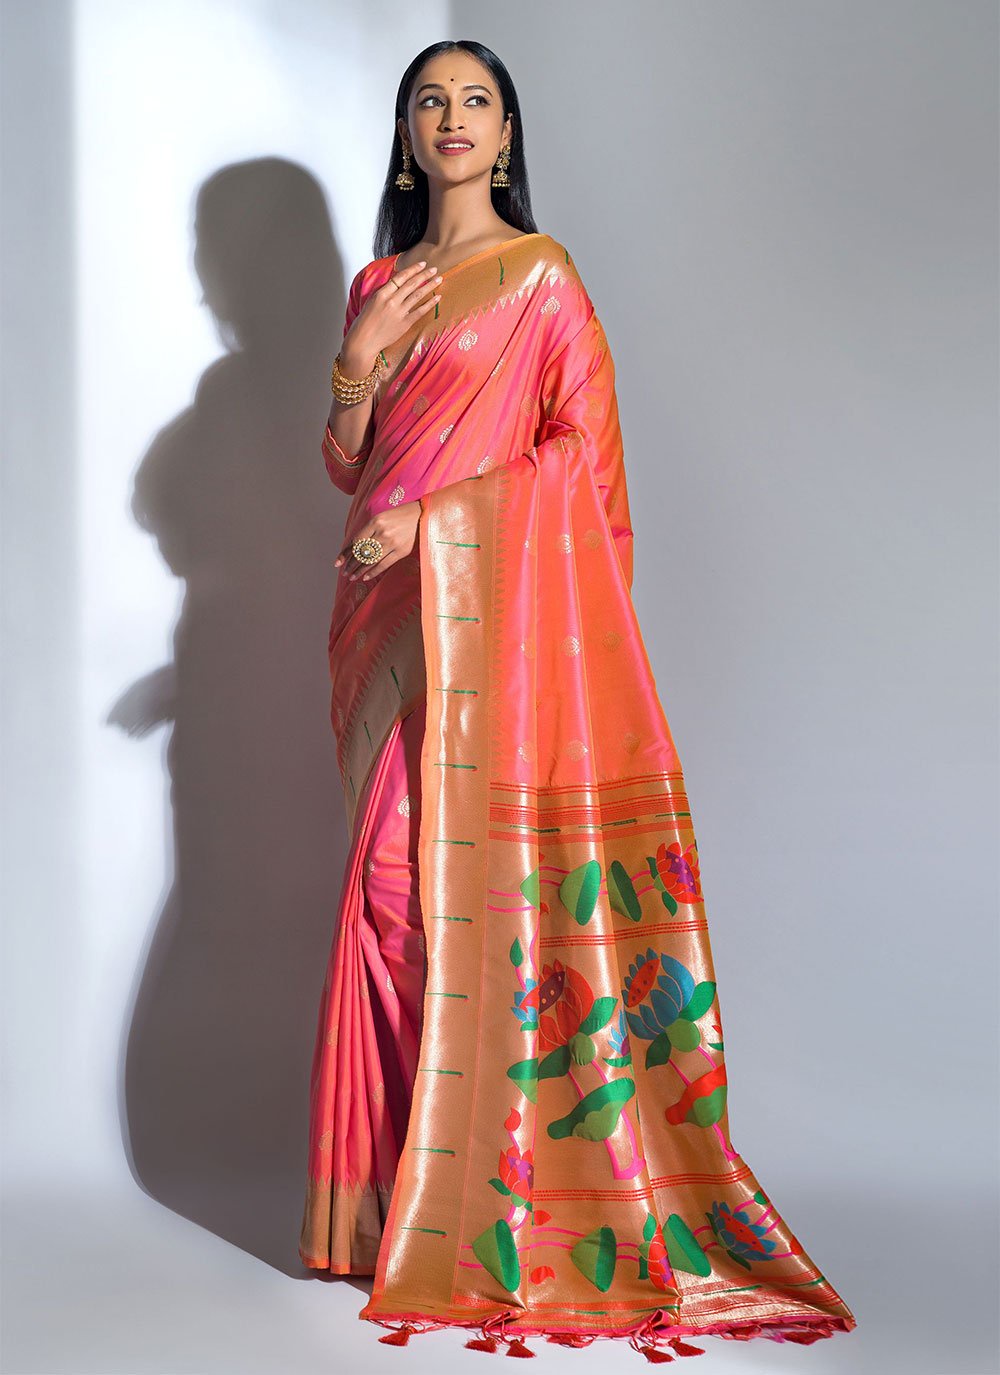 Best Indian Sarees Online Shopping Experience in USA